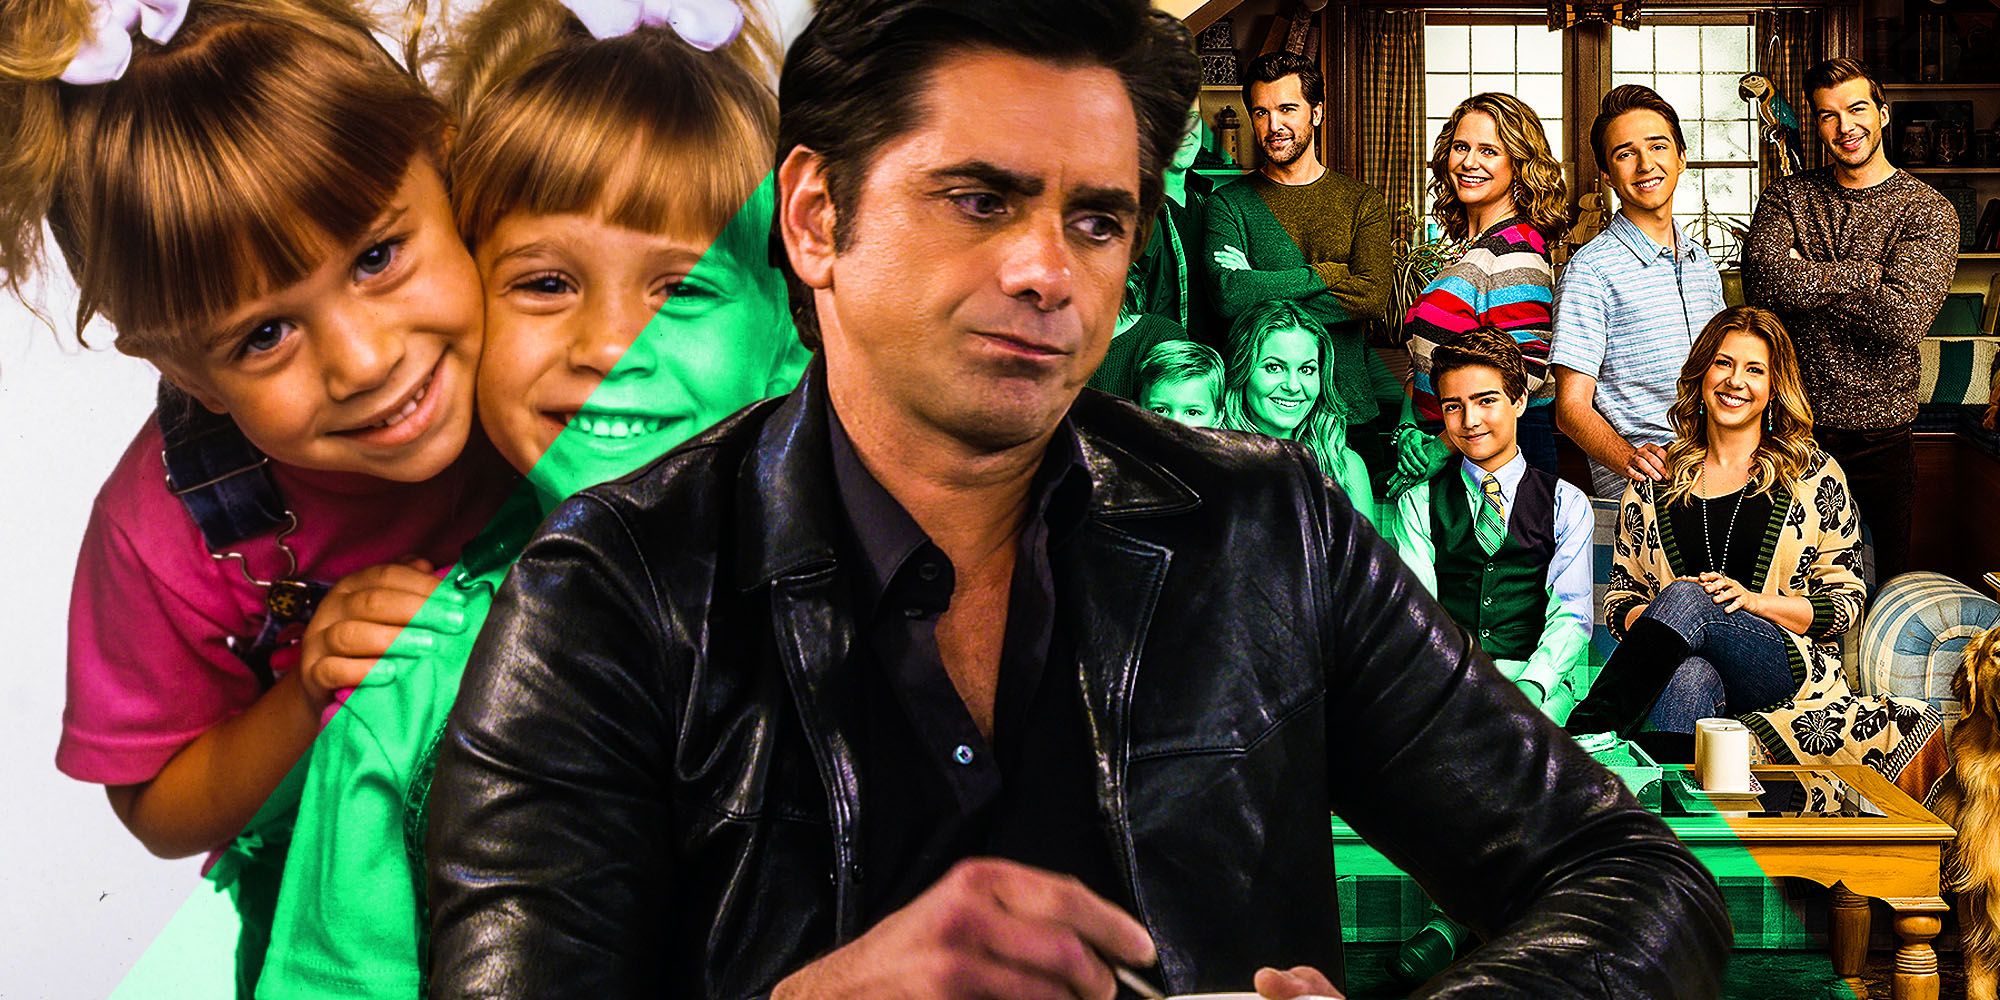 Fuller House Why John Stamos Is To Blame for The Olsen Twins’ Absence